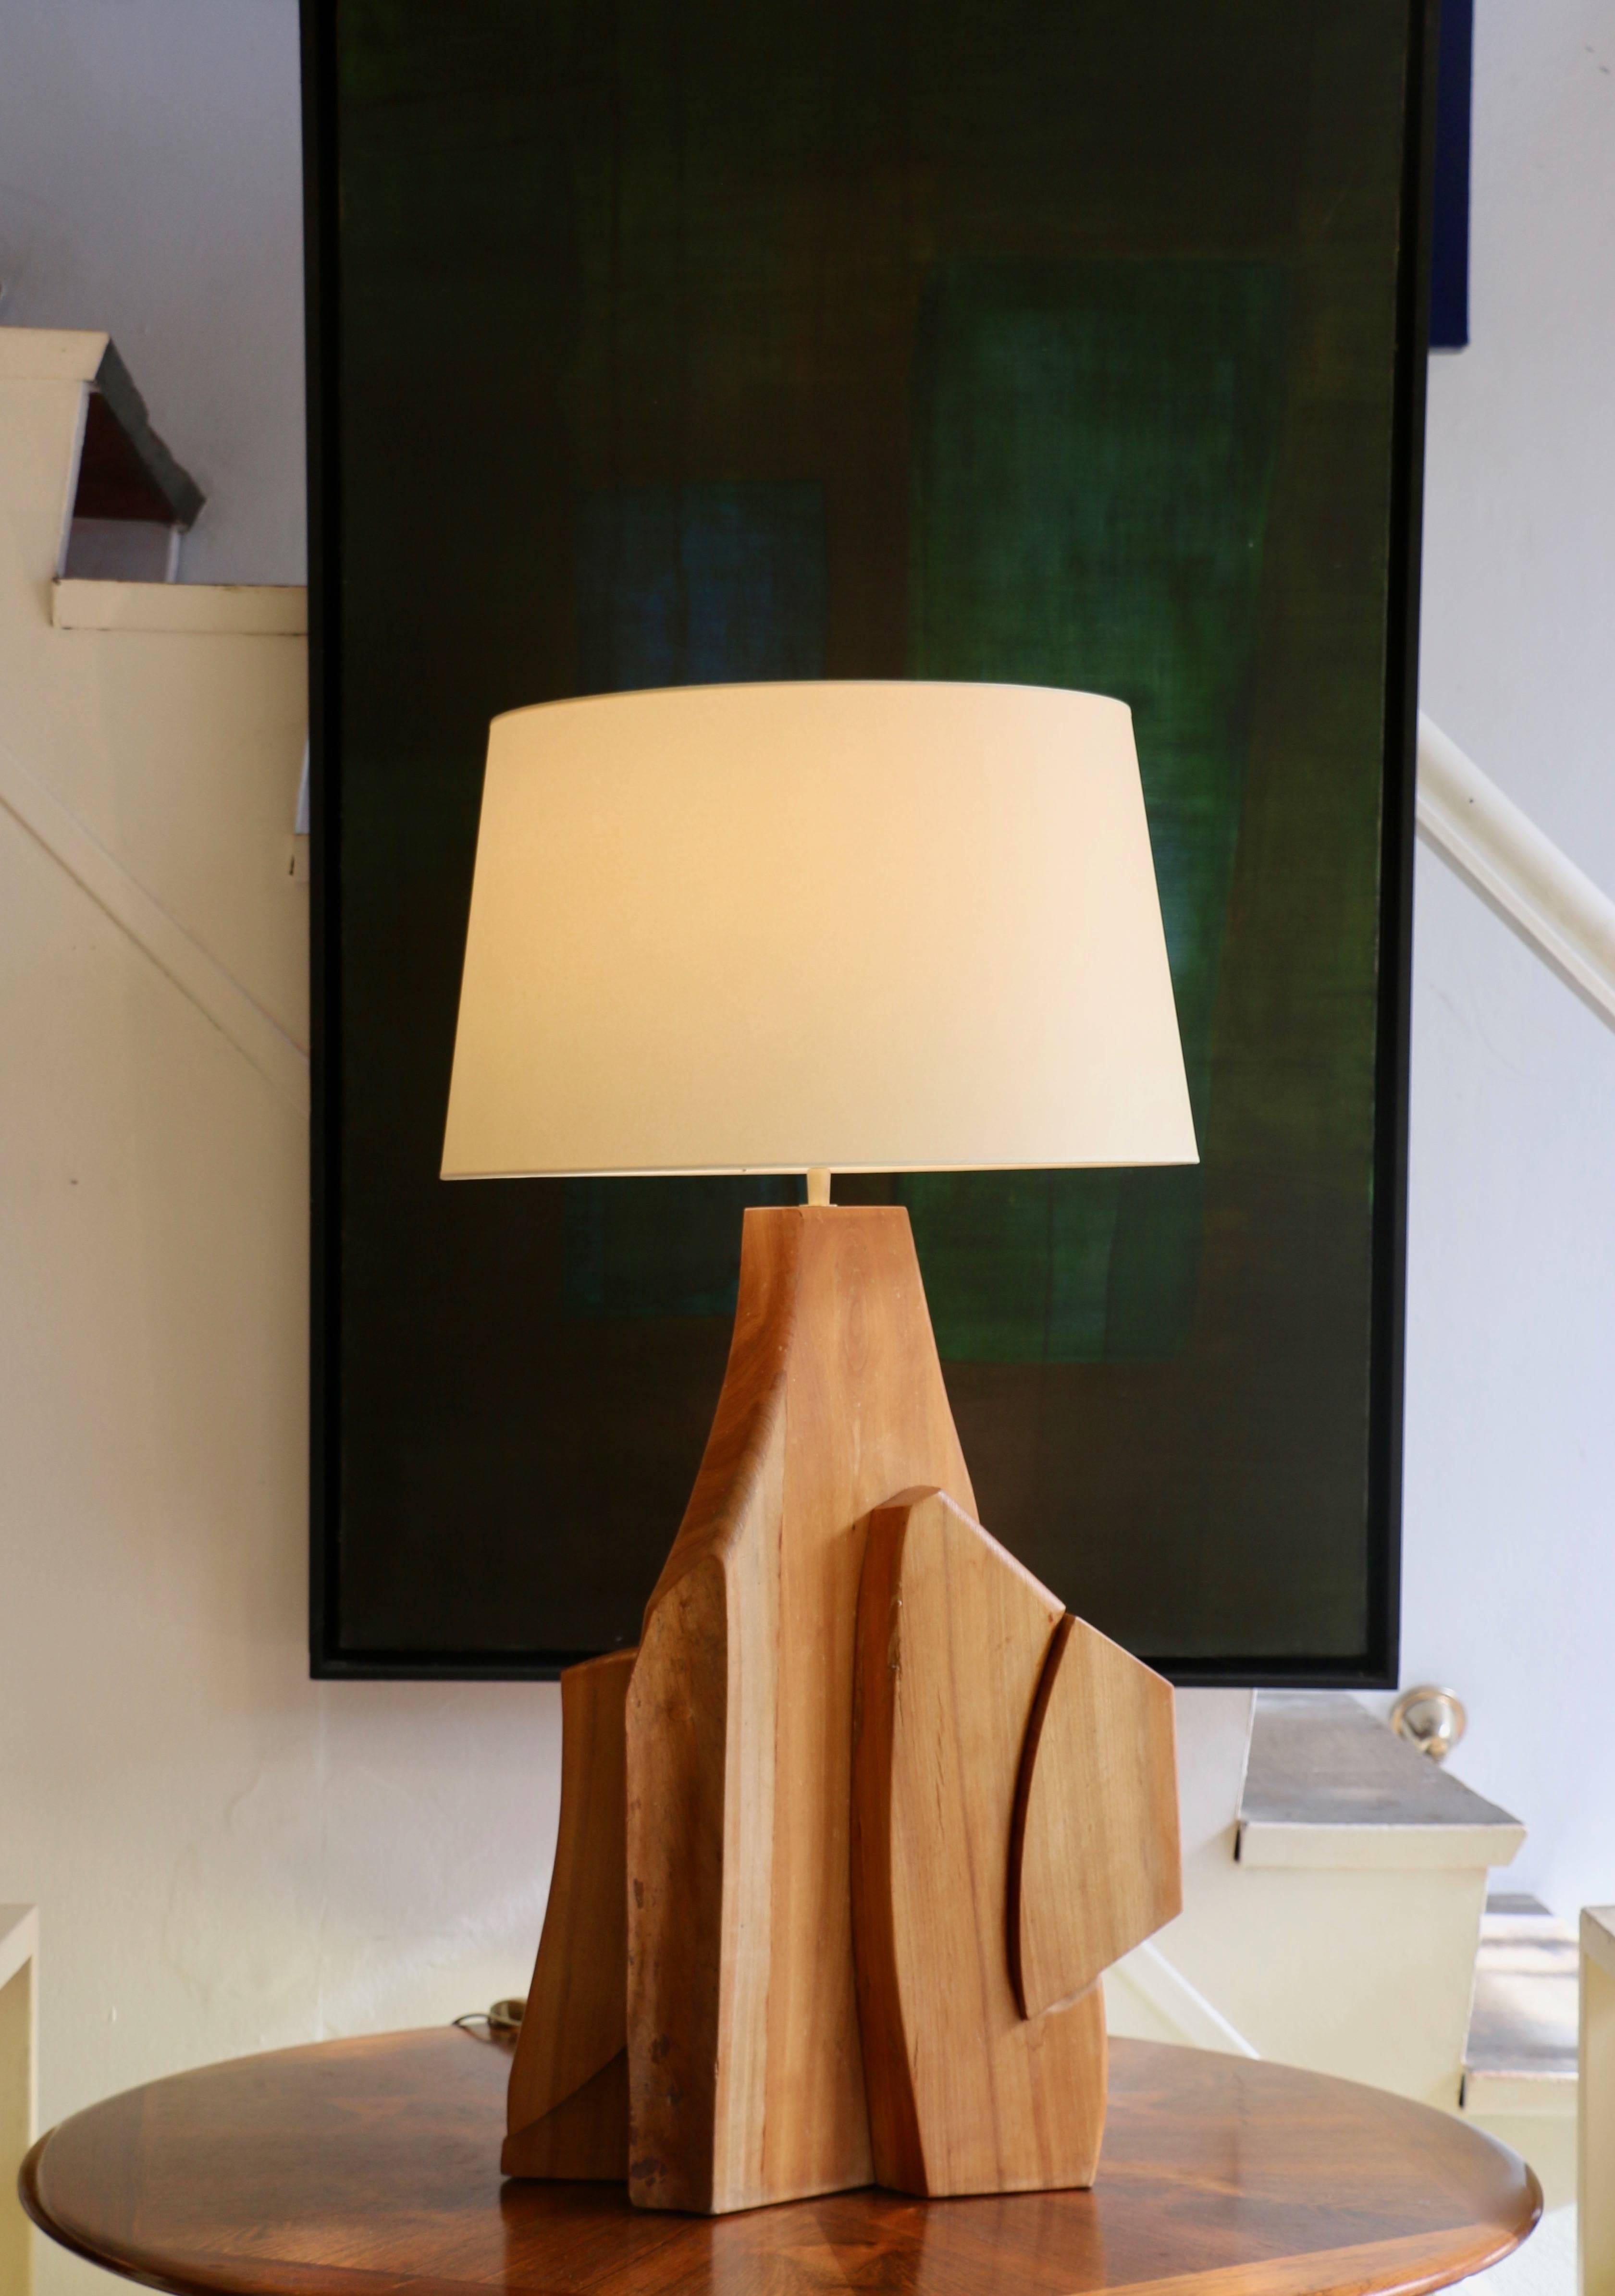 Mid-20th Century Large Wood Sculpture Table Lamp